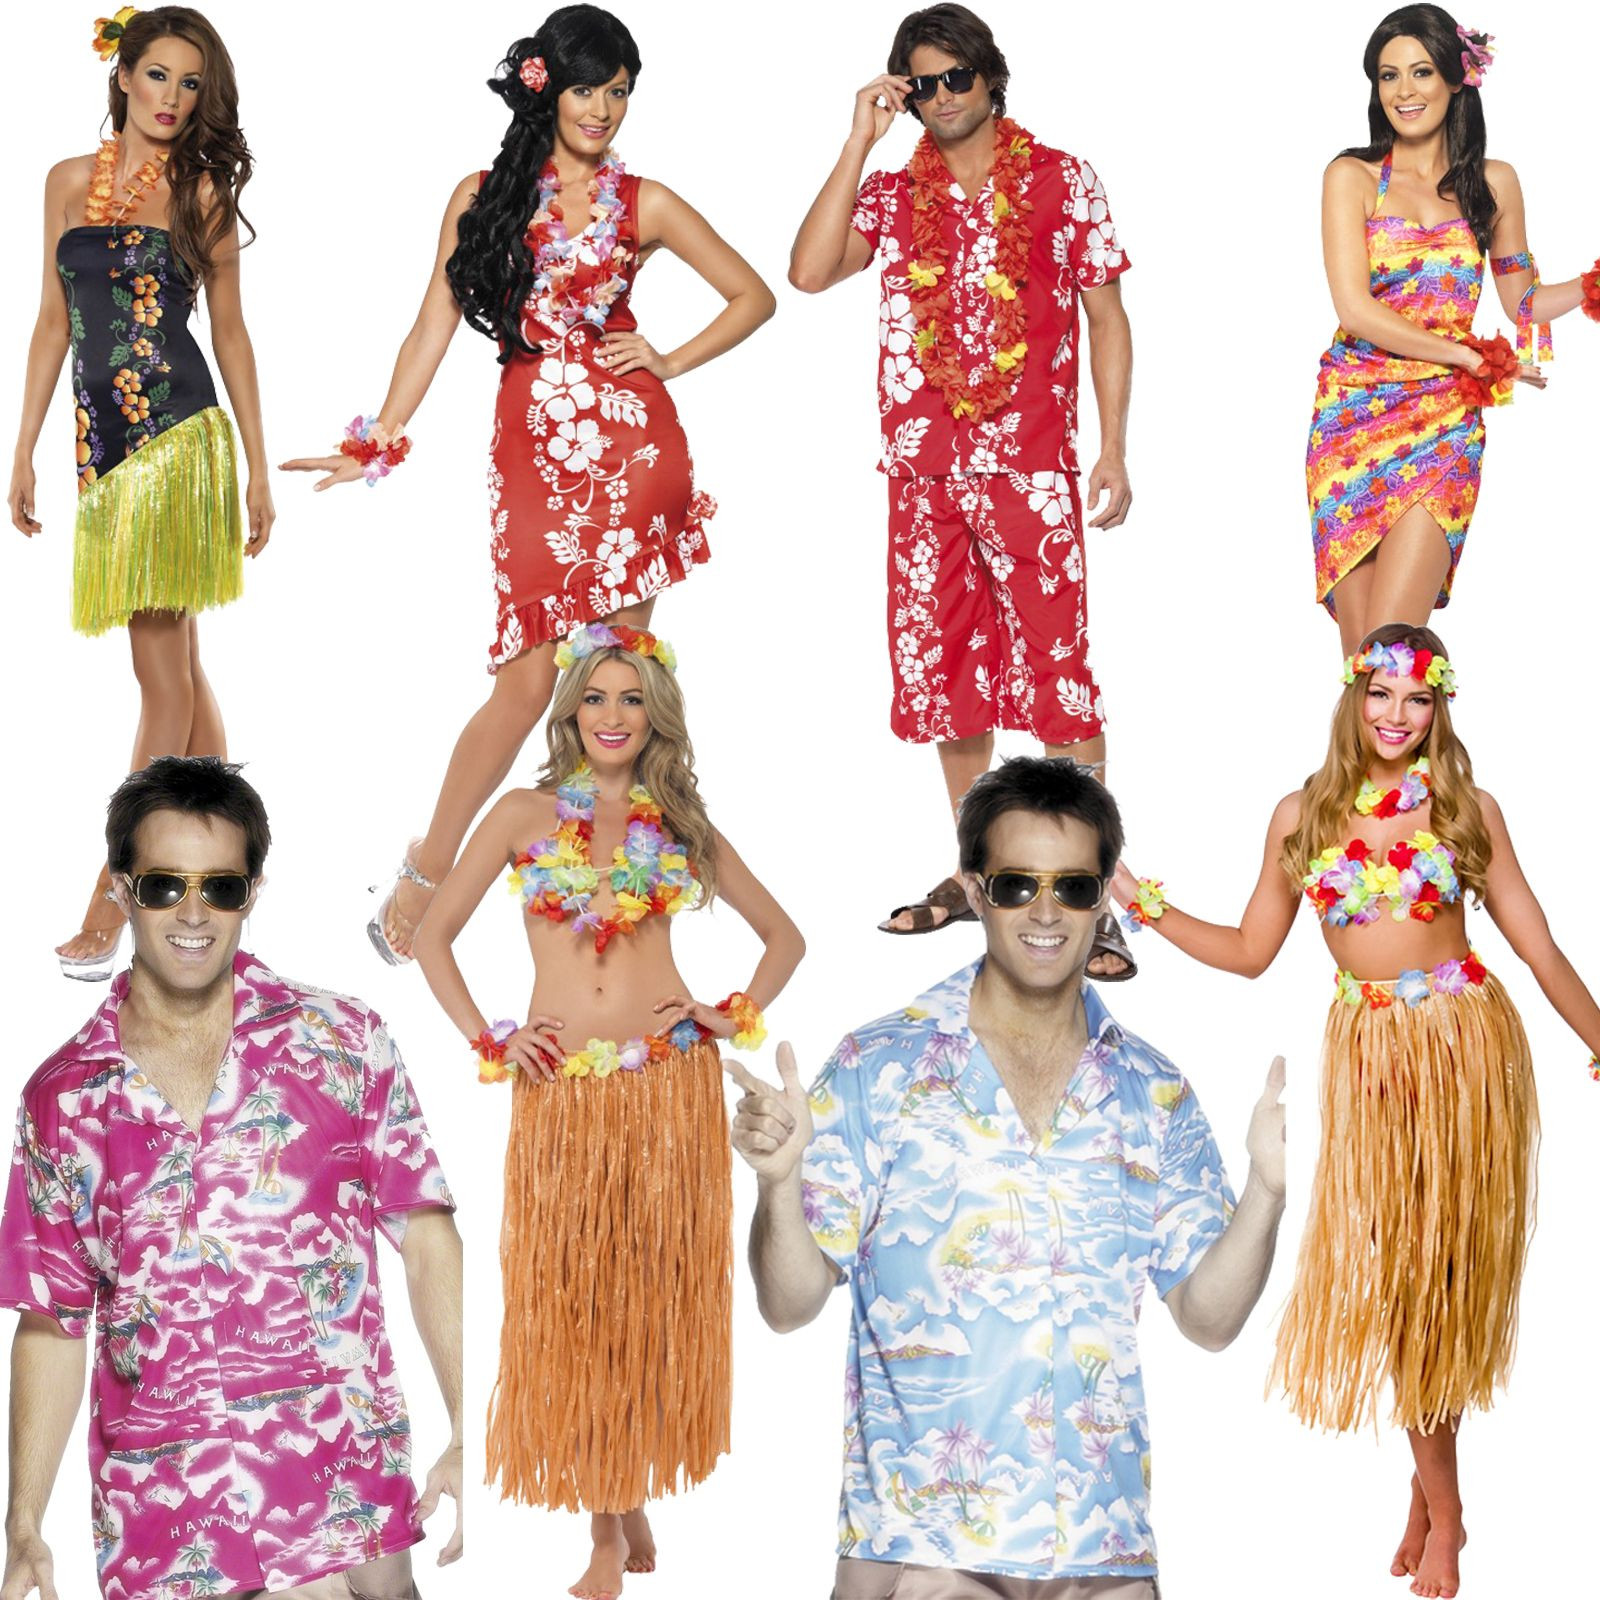 Beach Costume Party Ideas
 beach party costumes ideas Google Search